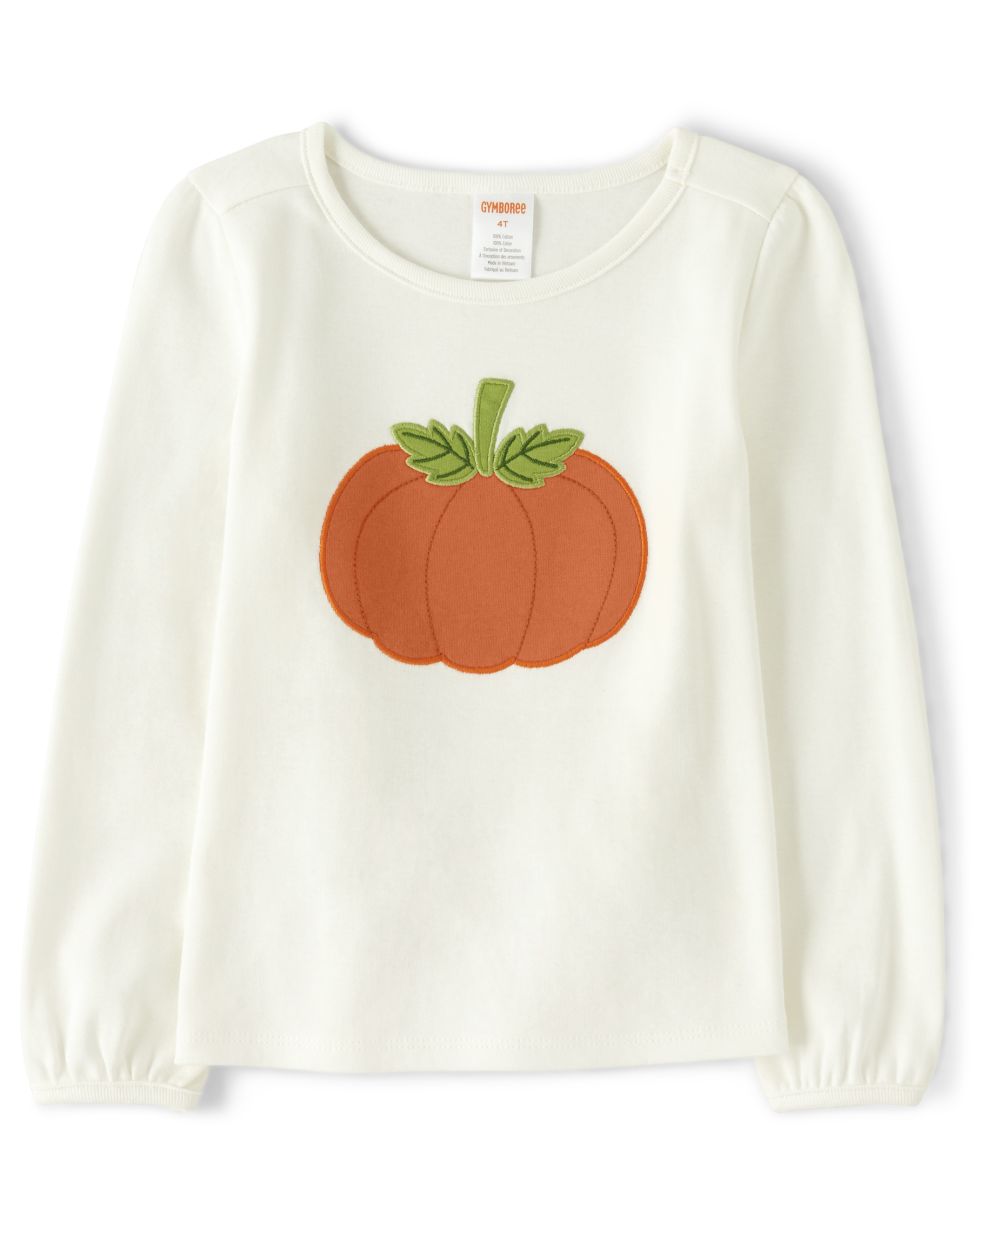 matching sibling fall outfits, white long sleeve shirt with a pumpkin